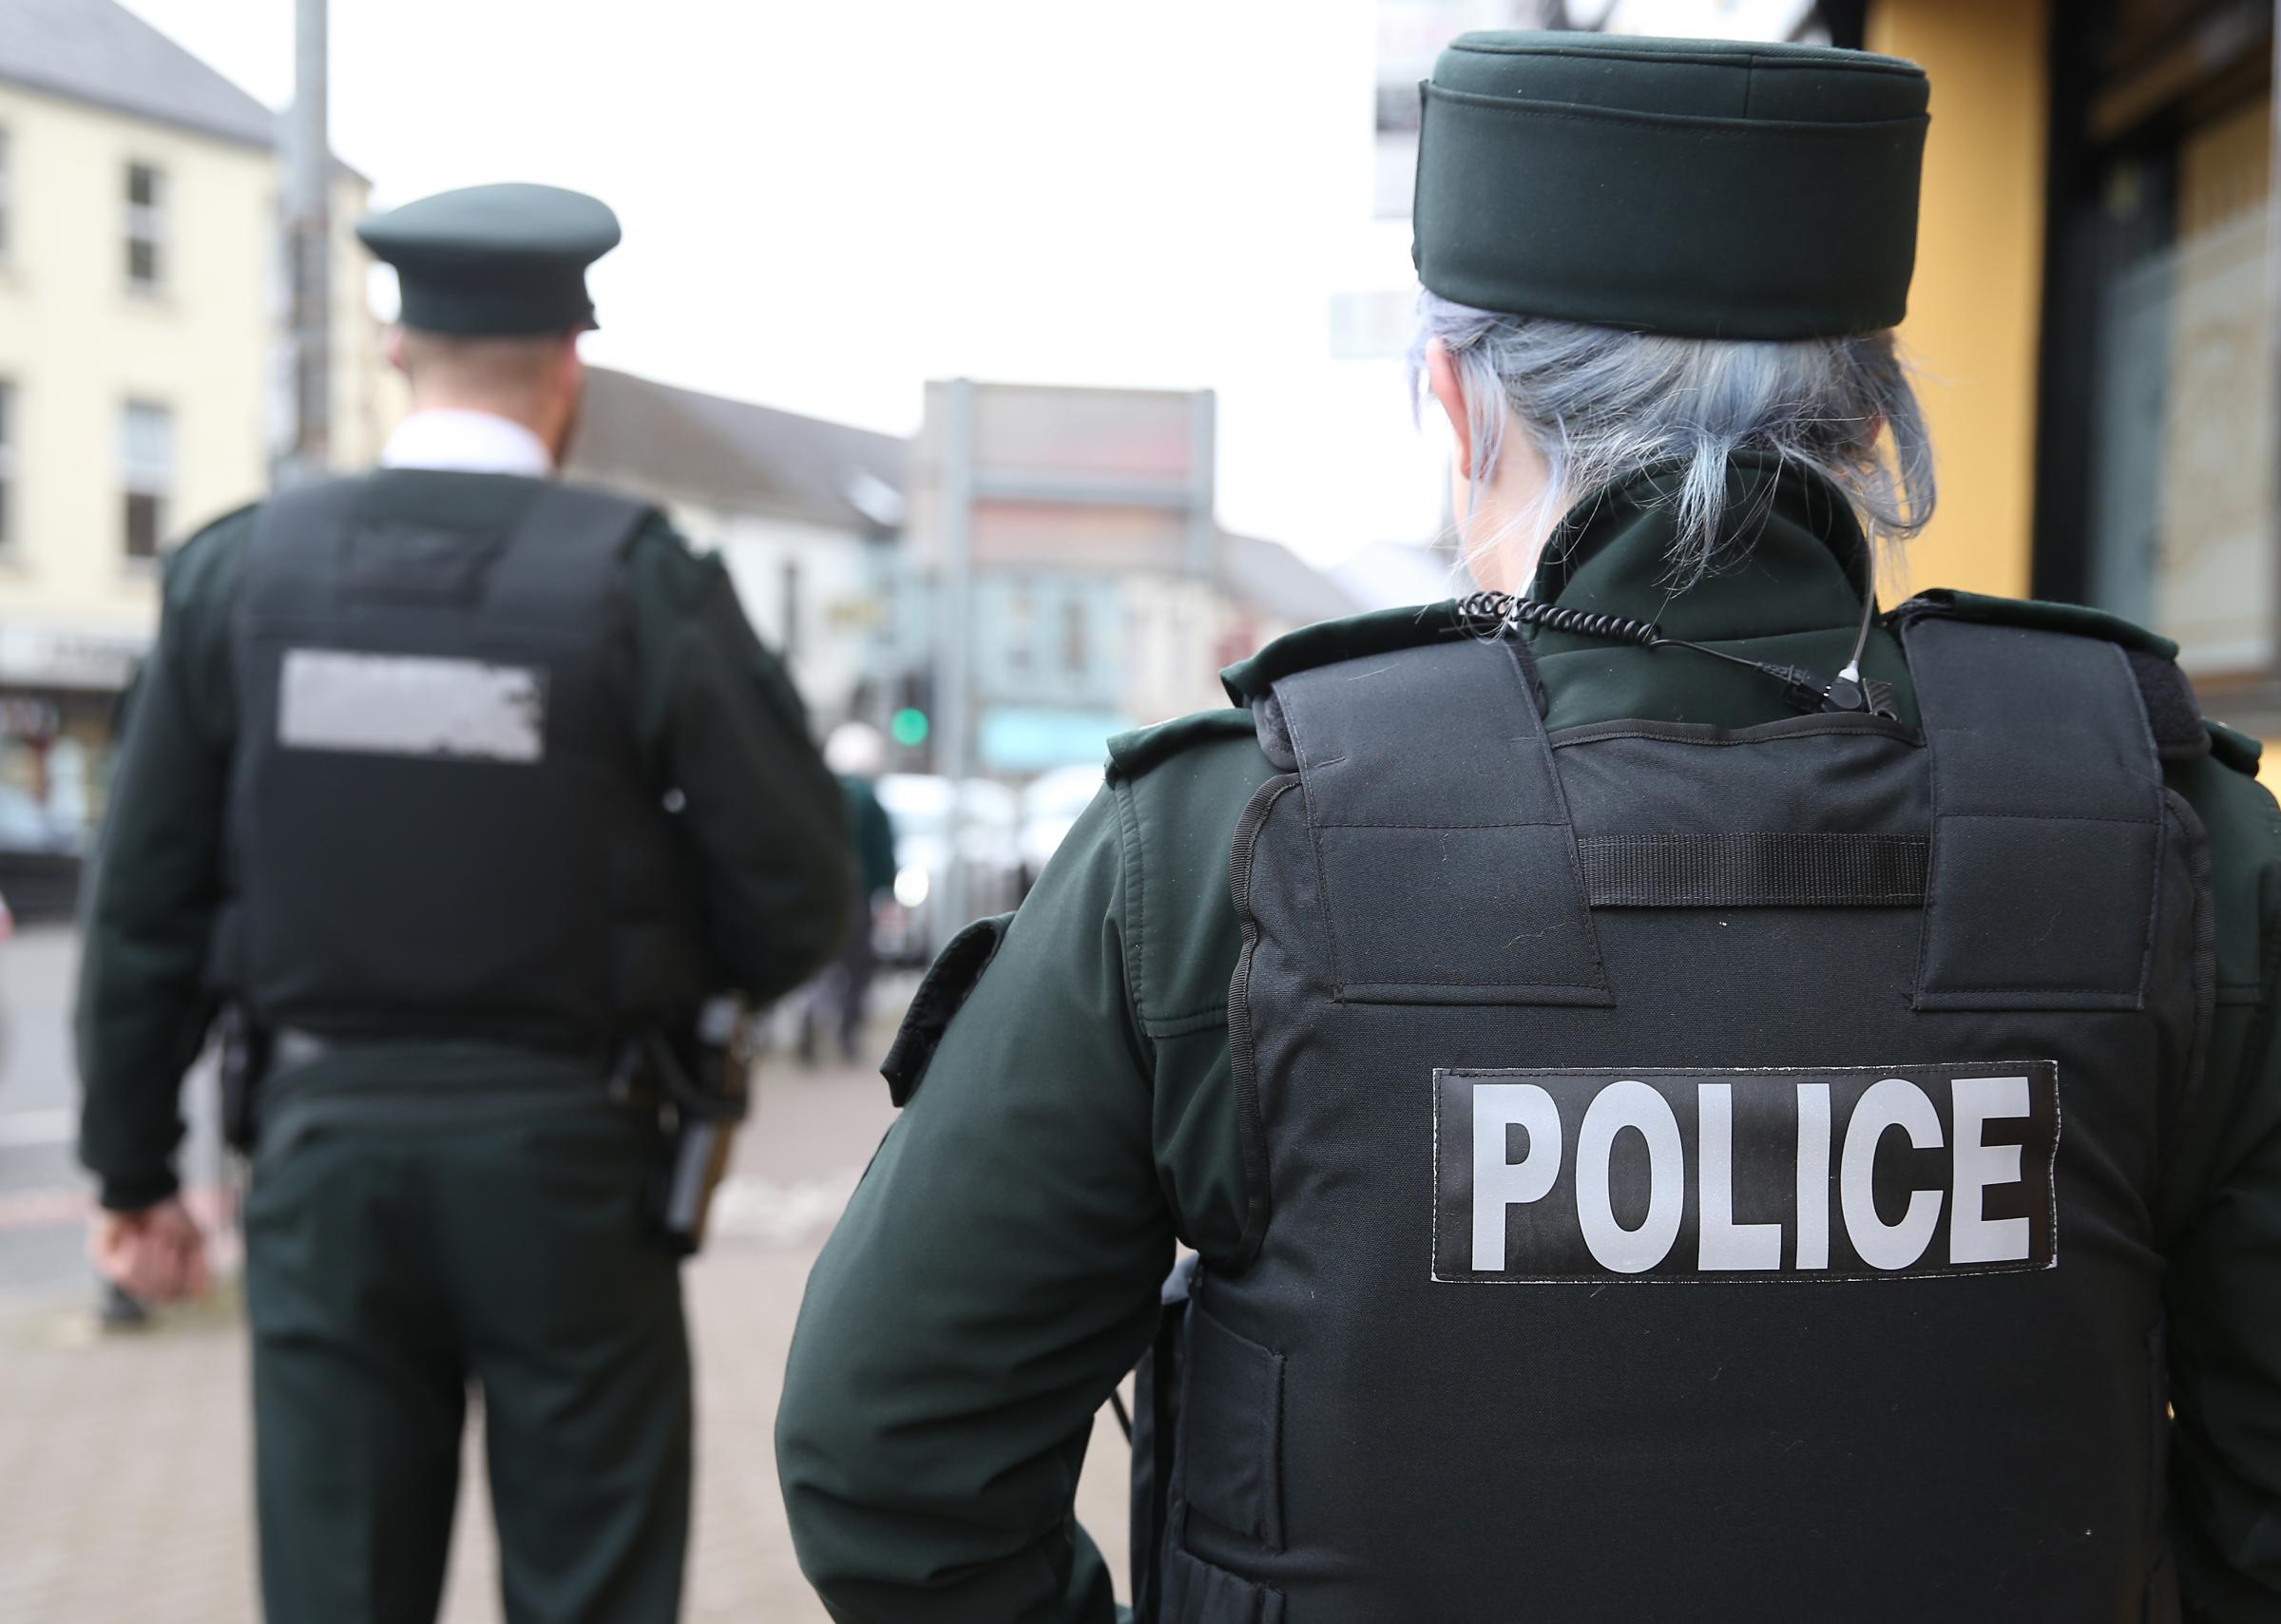 Man arrested in Fermanagh on suspicion of intent to supply Class B drugs